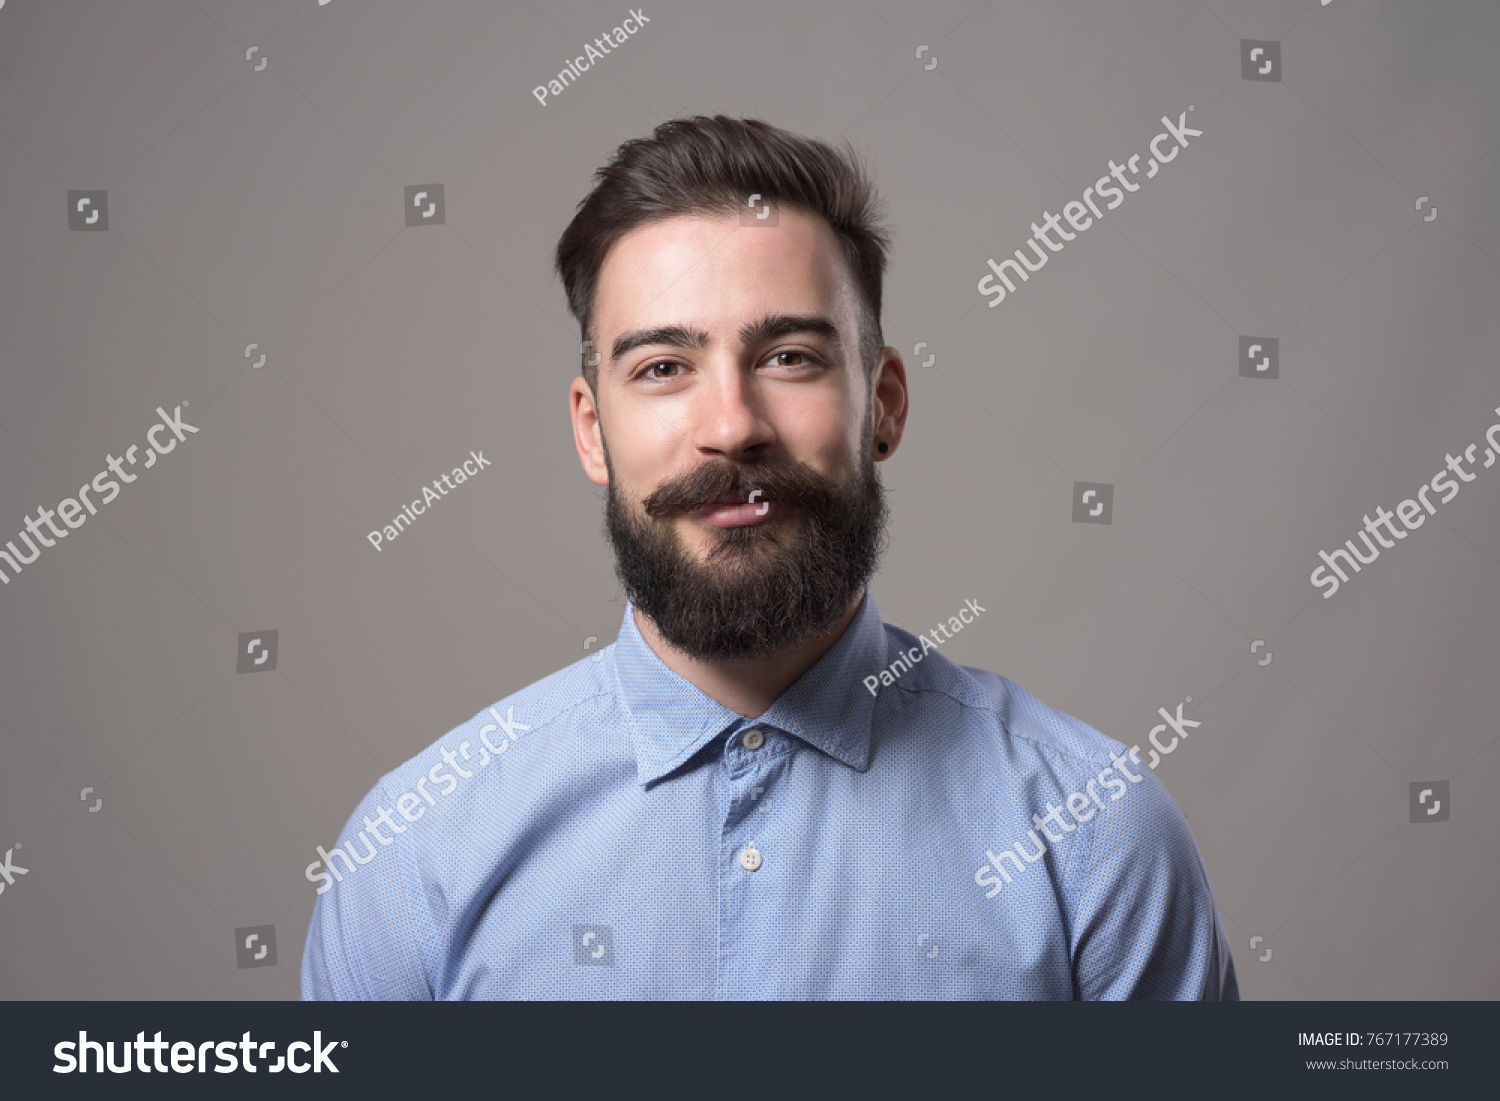 Horizontal  head and shoulder portrait of young bearded business man smiling at camera against gray studio background. #767177389